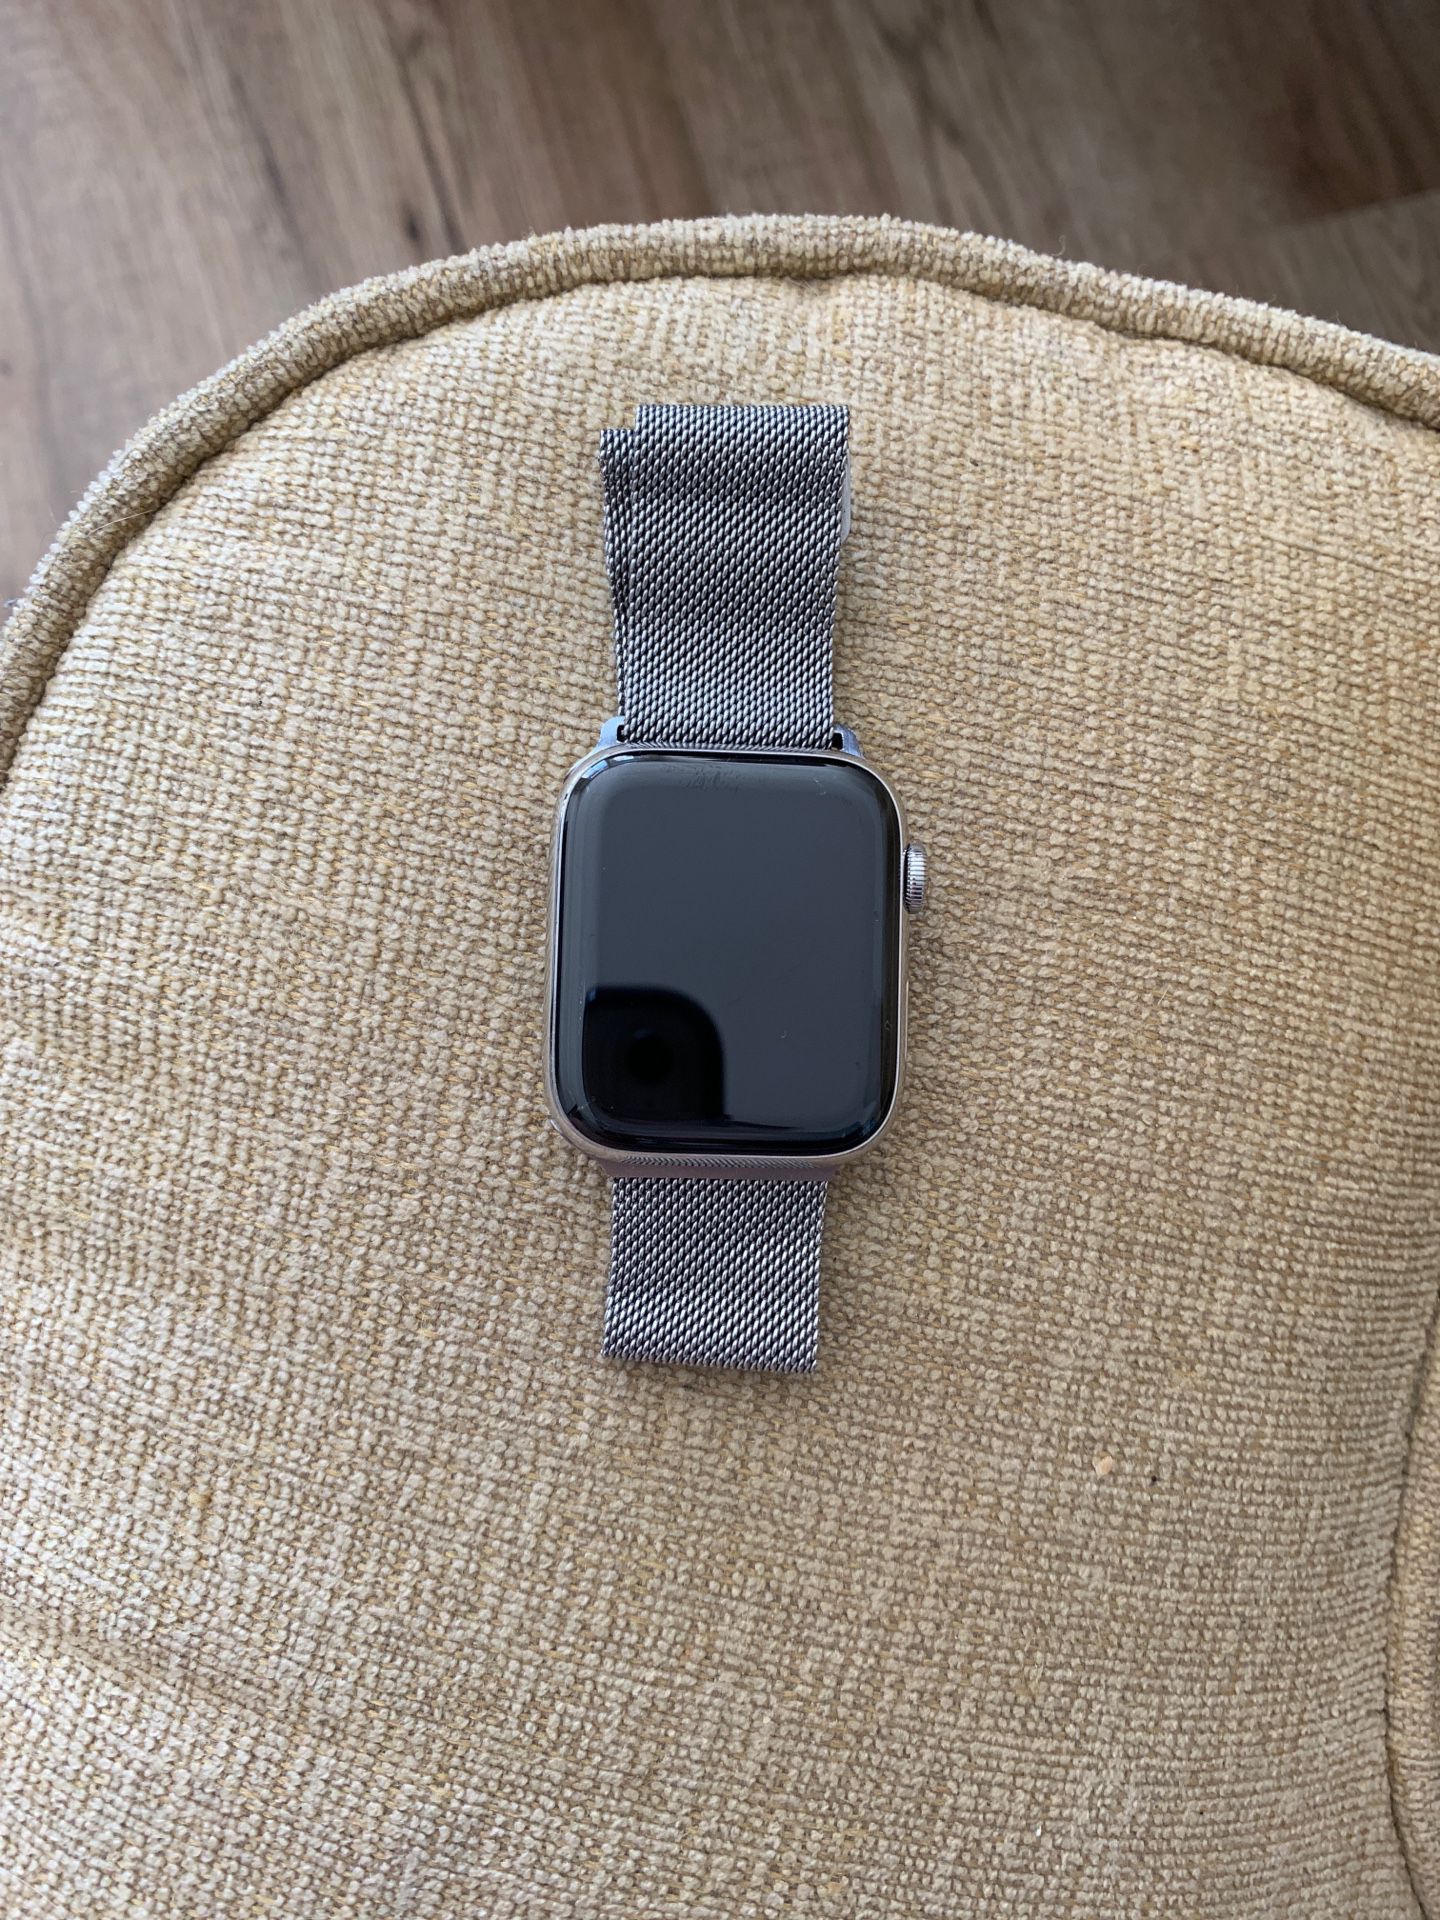 Apple Watch series 4 stainless steel cellular